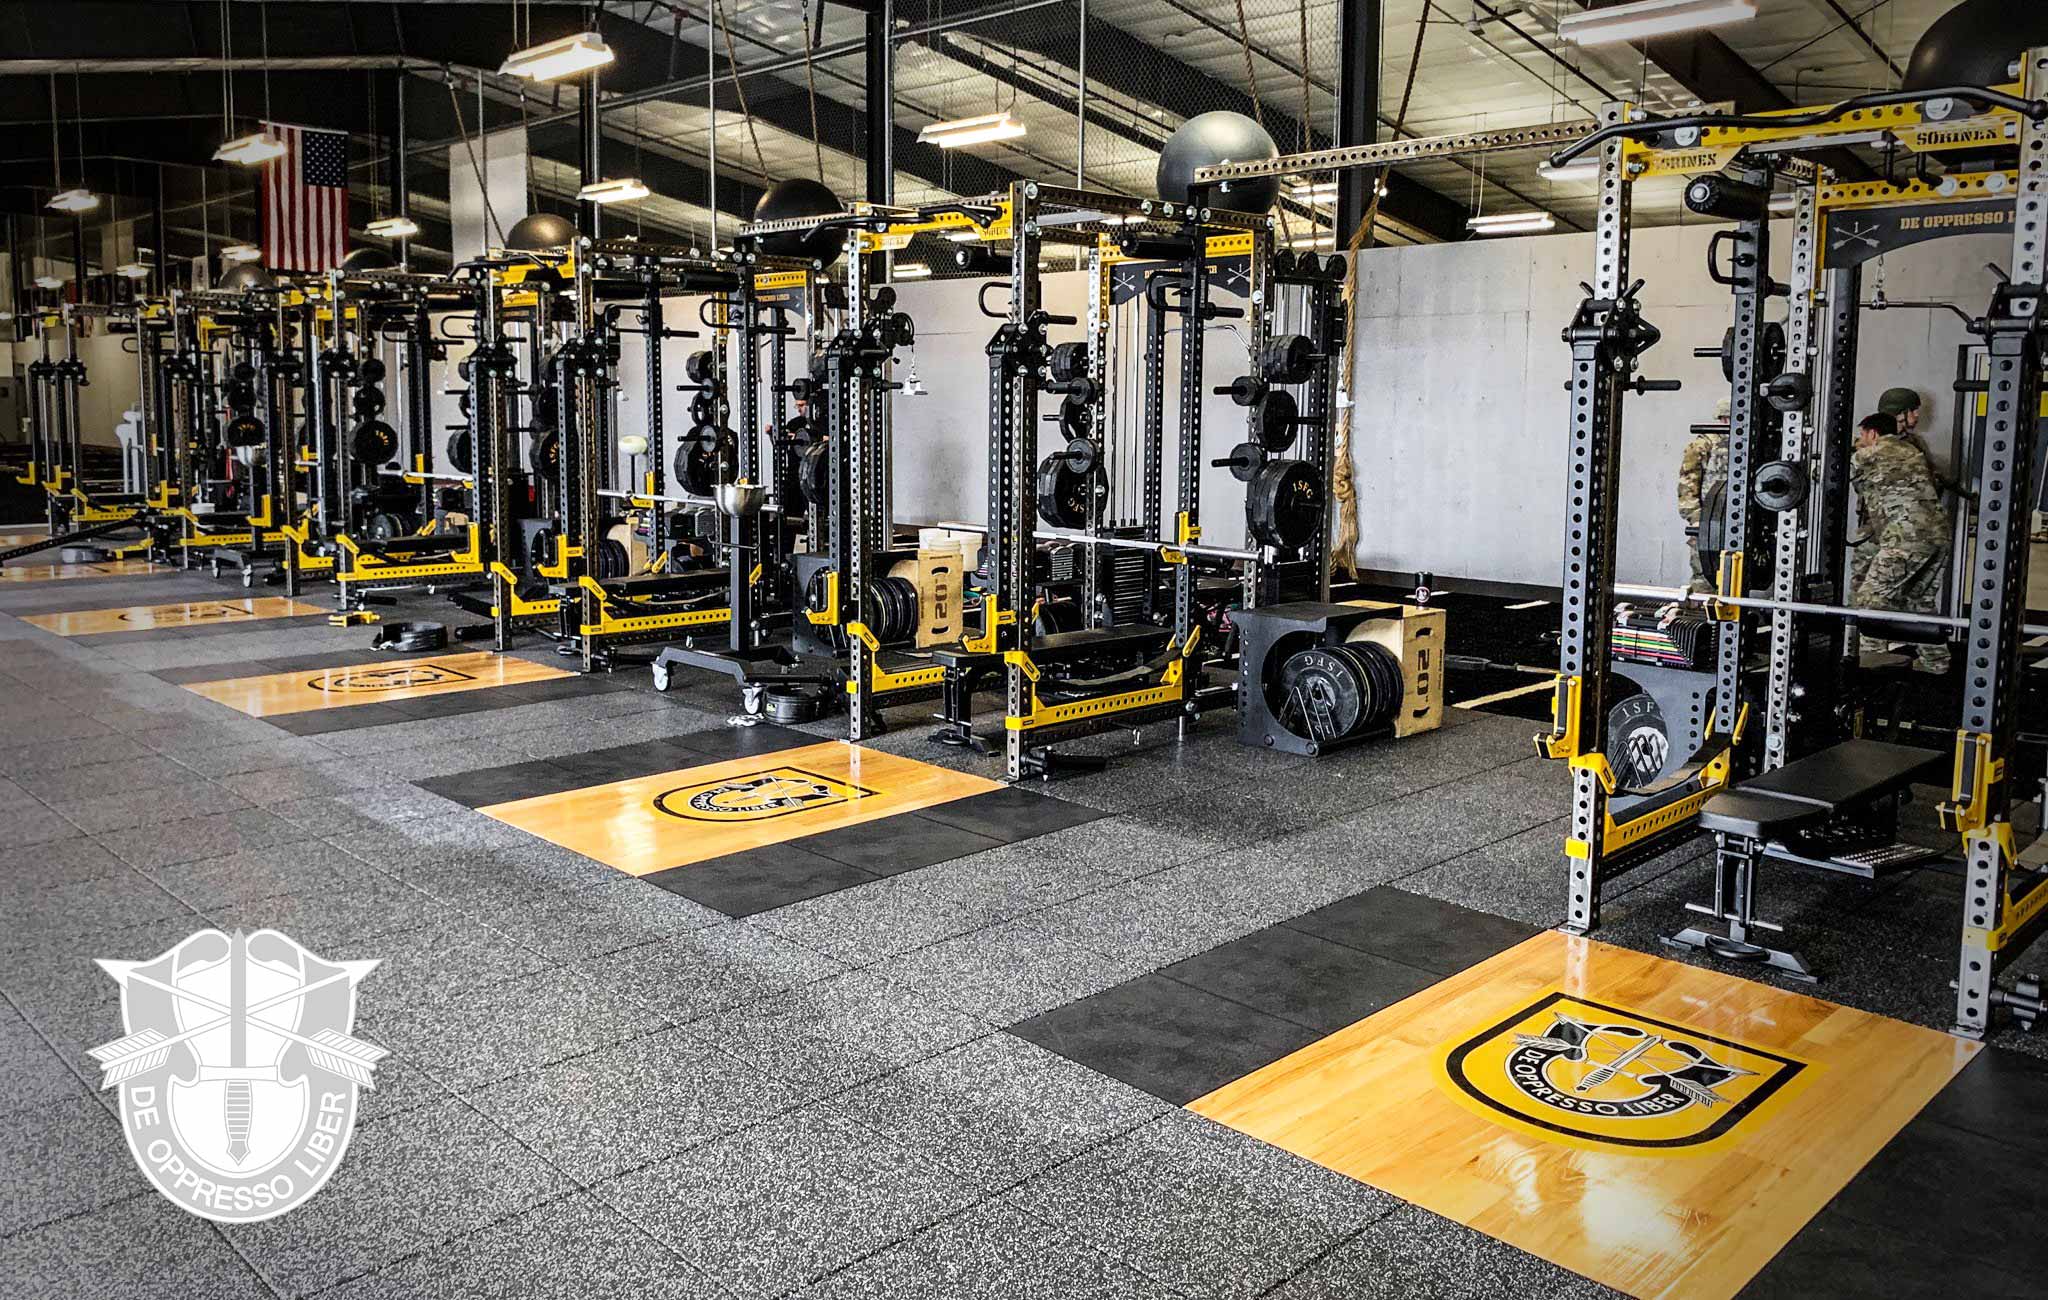 1st SFG Sorinex strength and conditioning facility